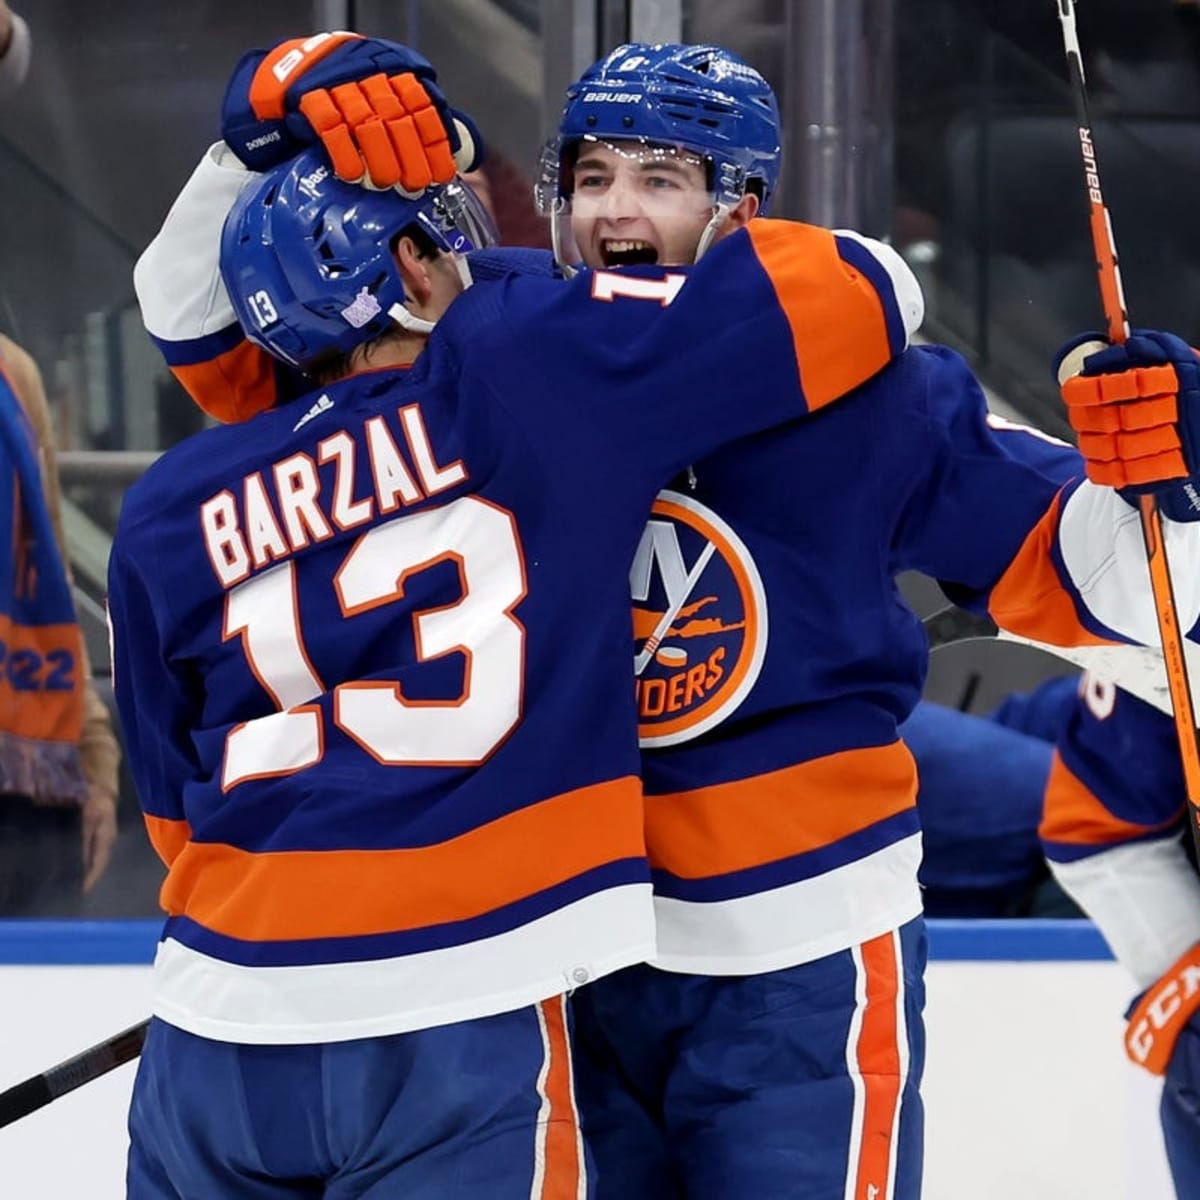 Watch Islanders at Hurricanes, Game 1 NHL live stream, TV time - How to Watch and Stream Major League and College Sports